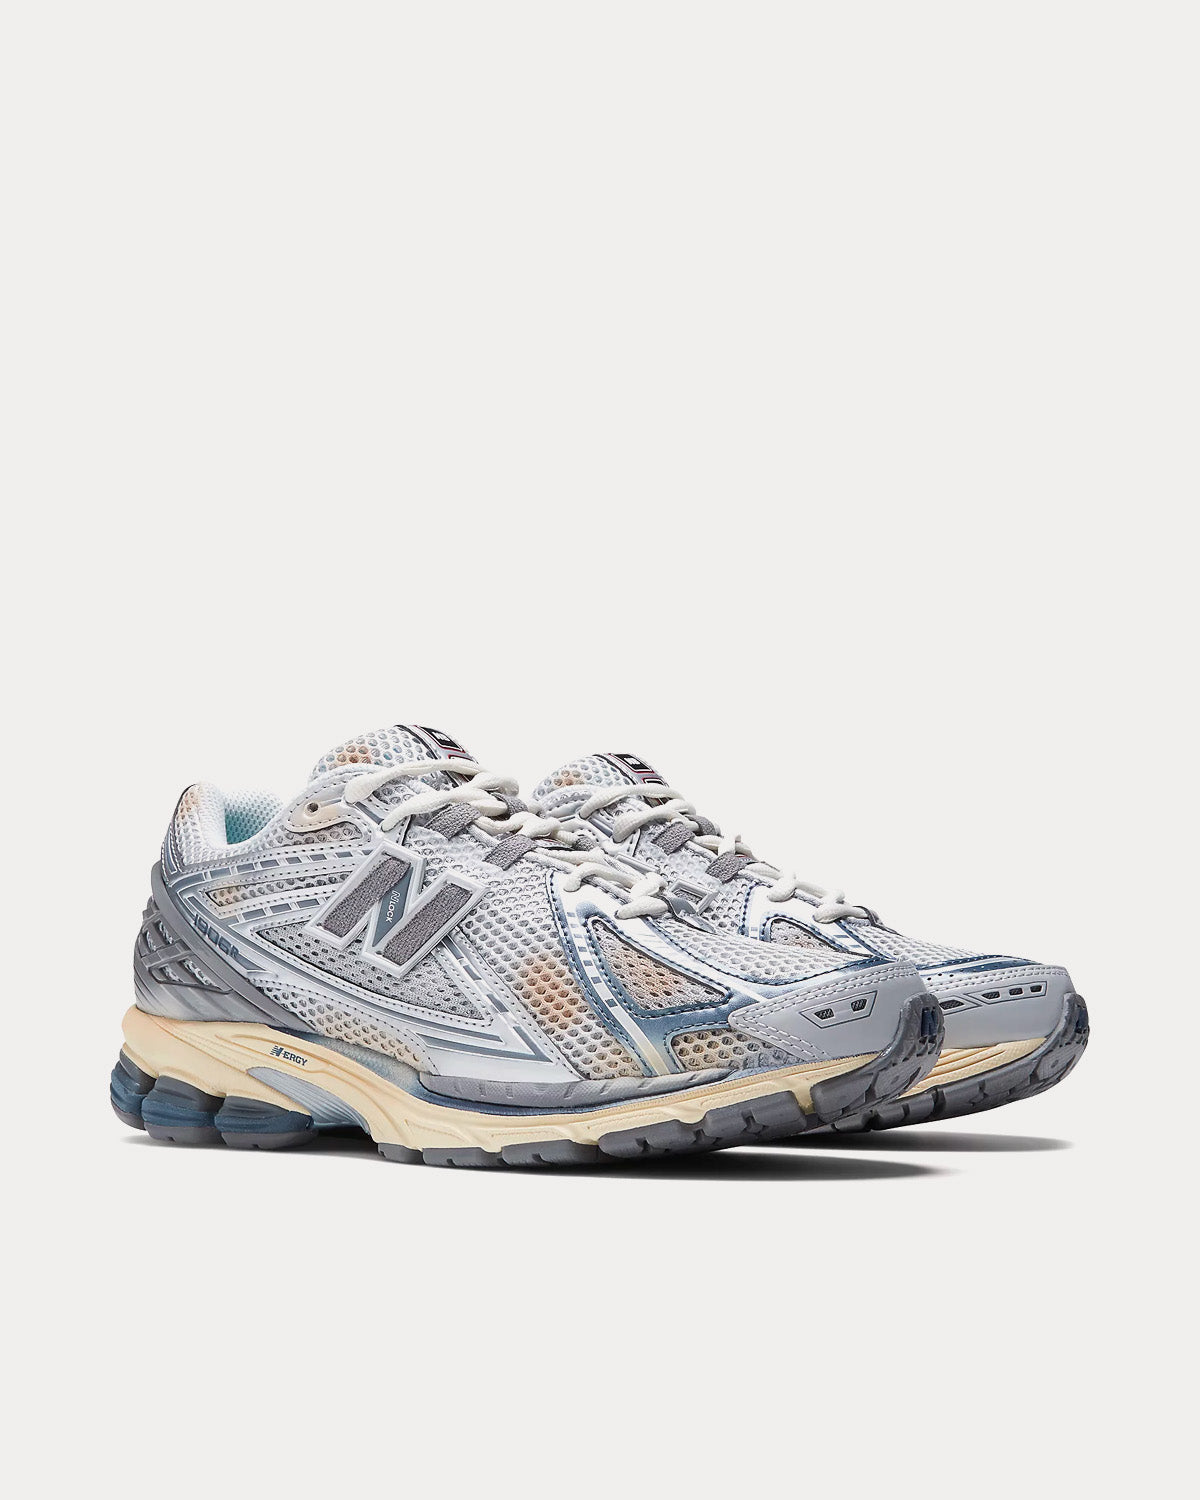 New Balance x thisisneverthat - 1906R Rain Cloud with Metallic Silver and Grey Low Top Sneakers